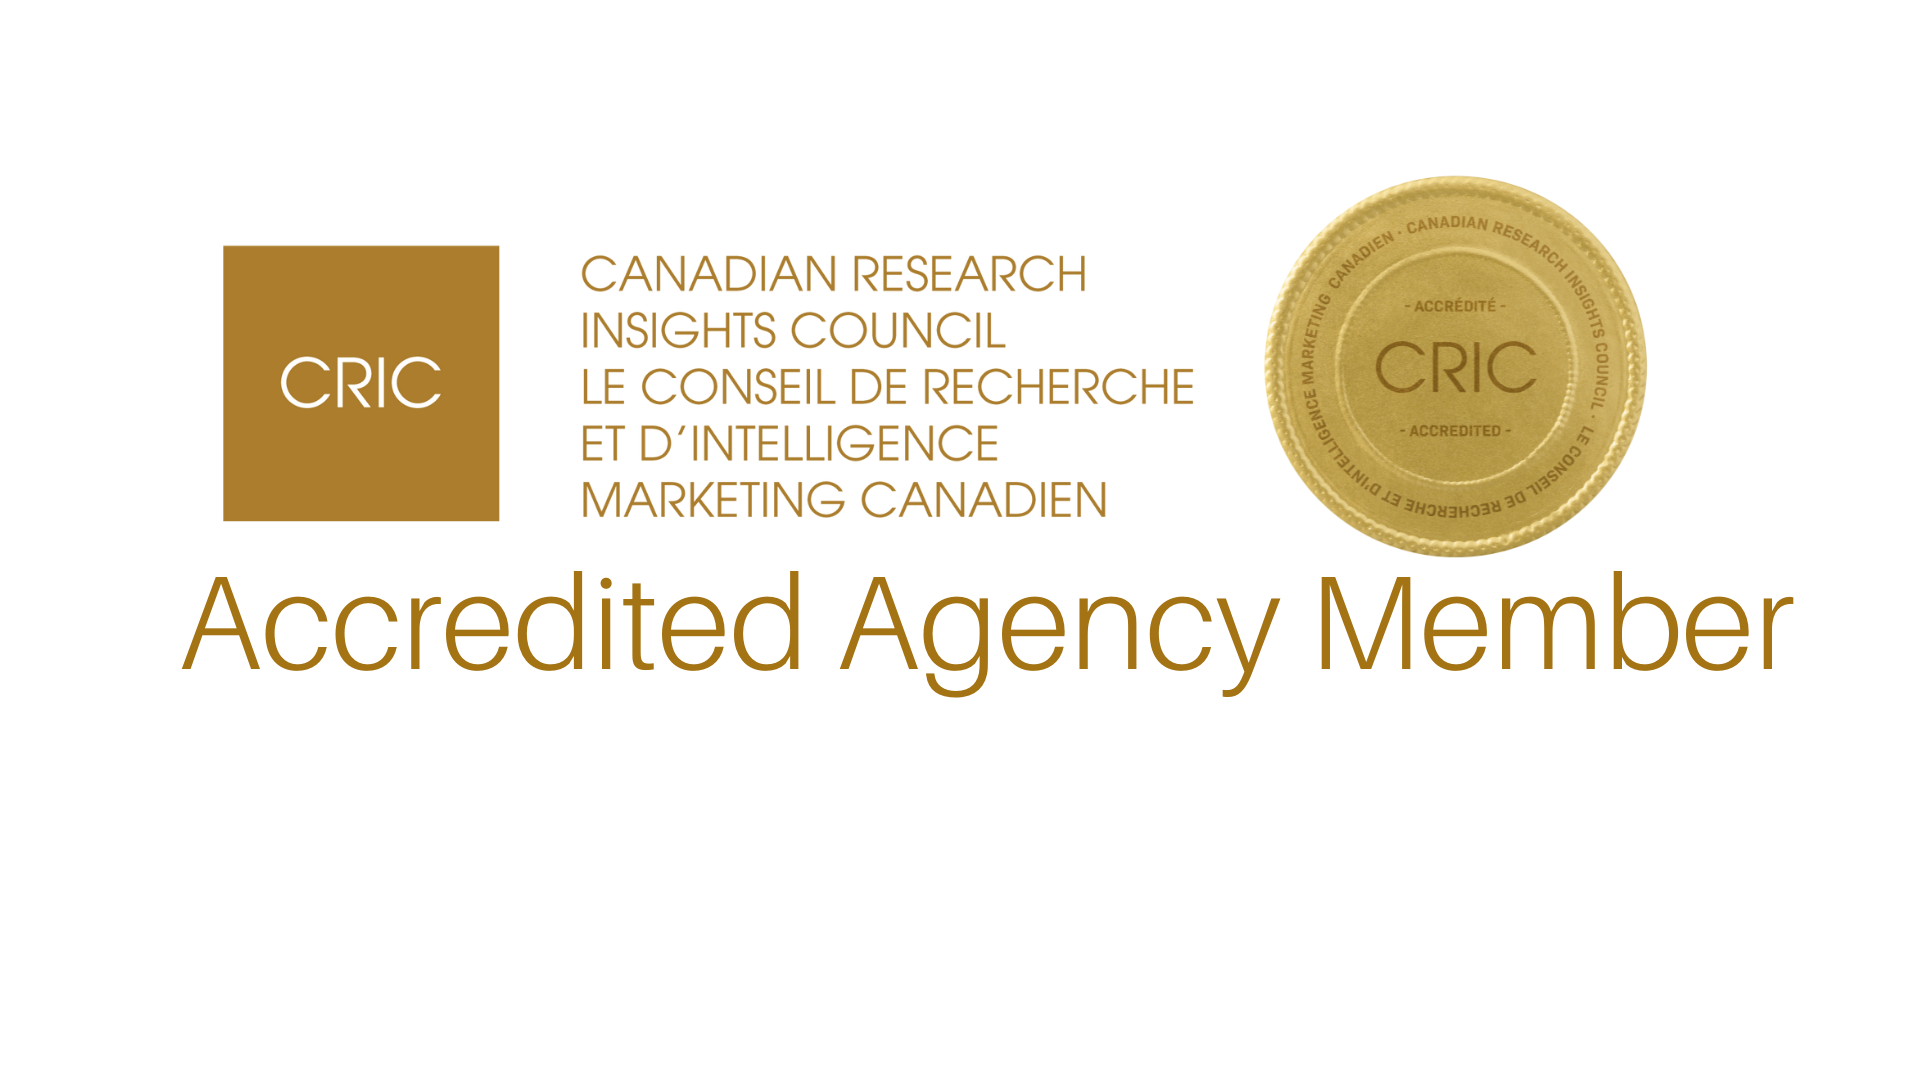 CRIC Accredited Agency Member